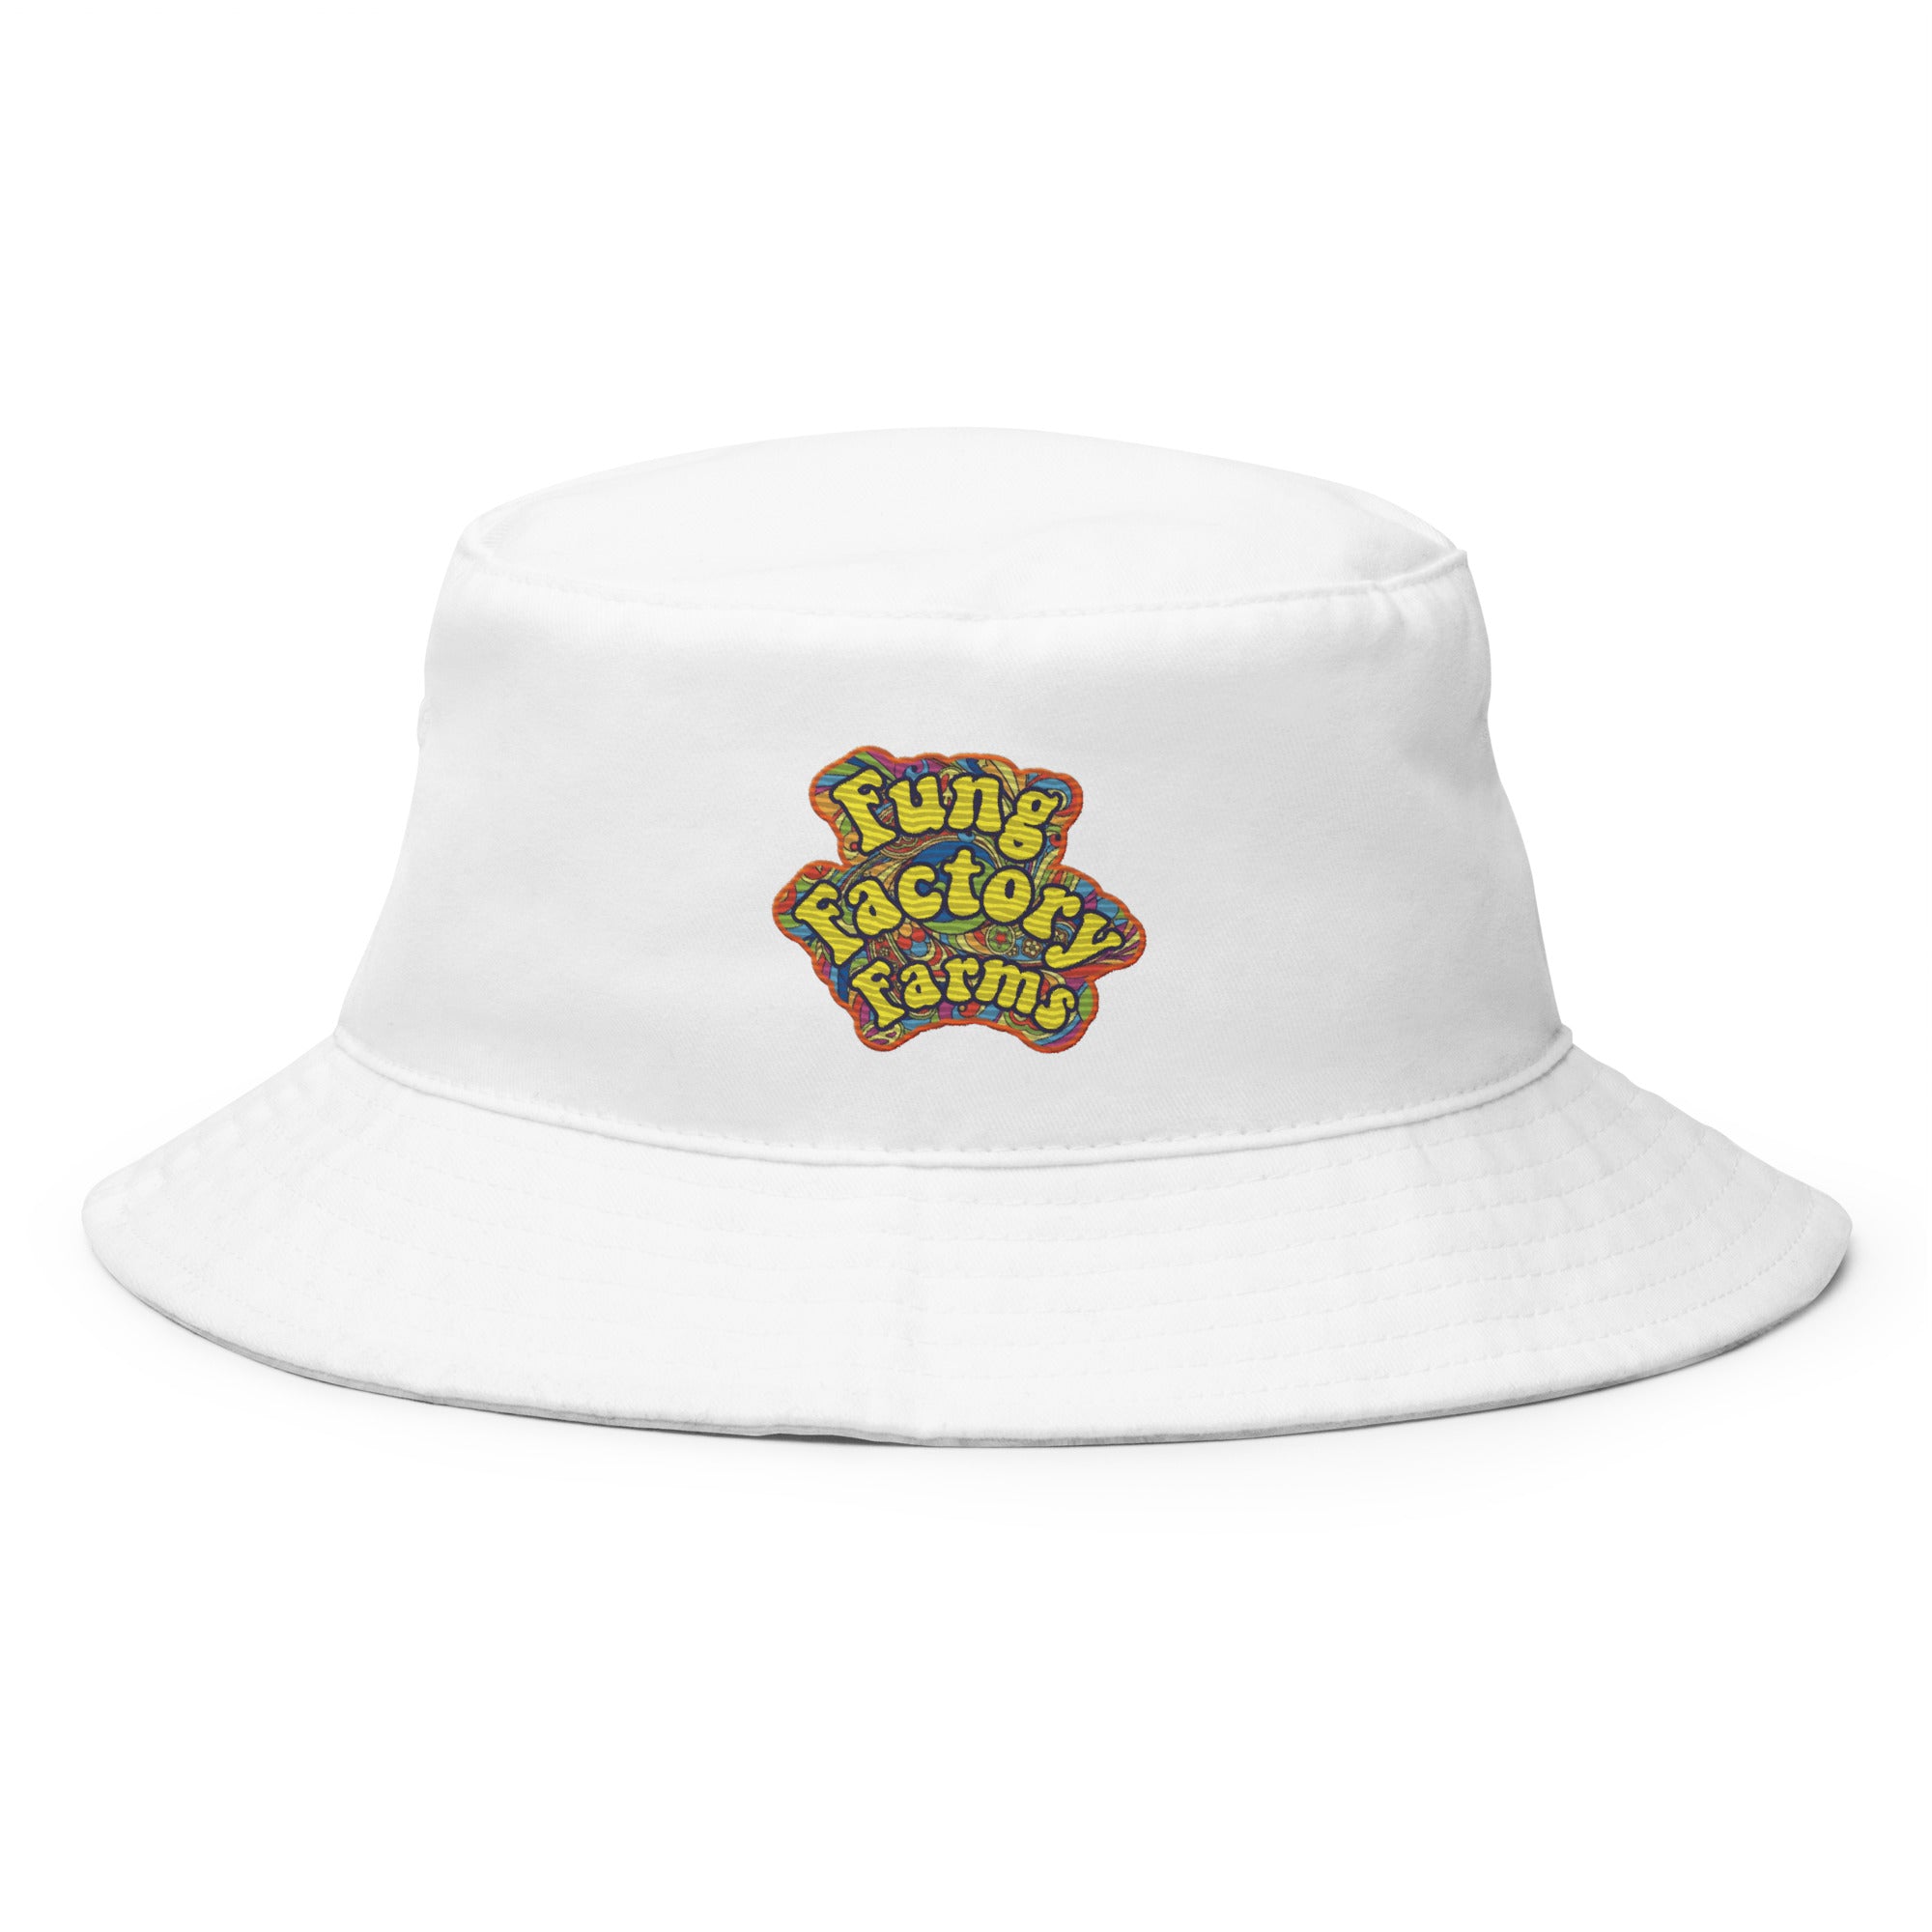 Fung Factory Farms Bucket Hat